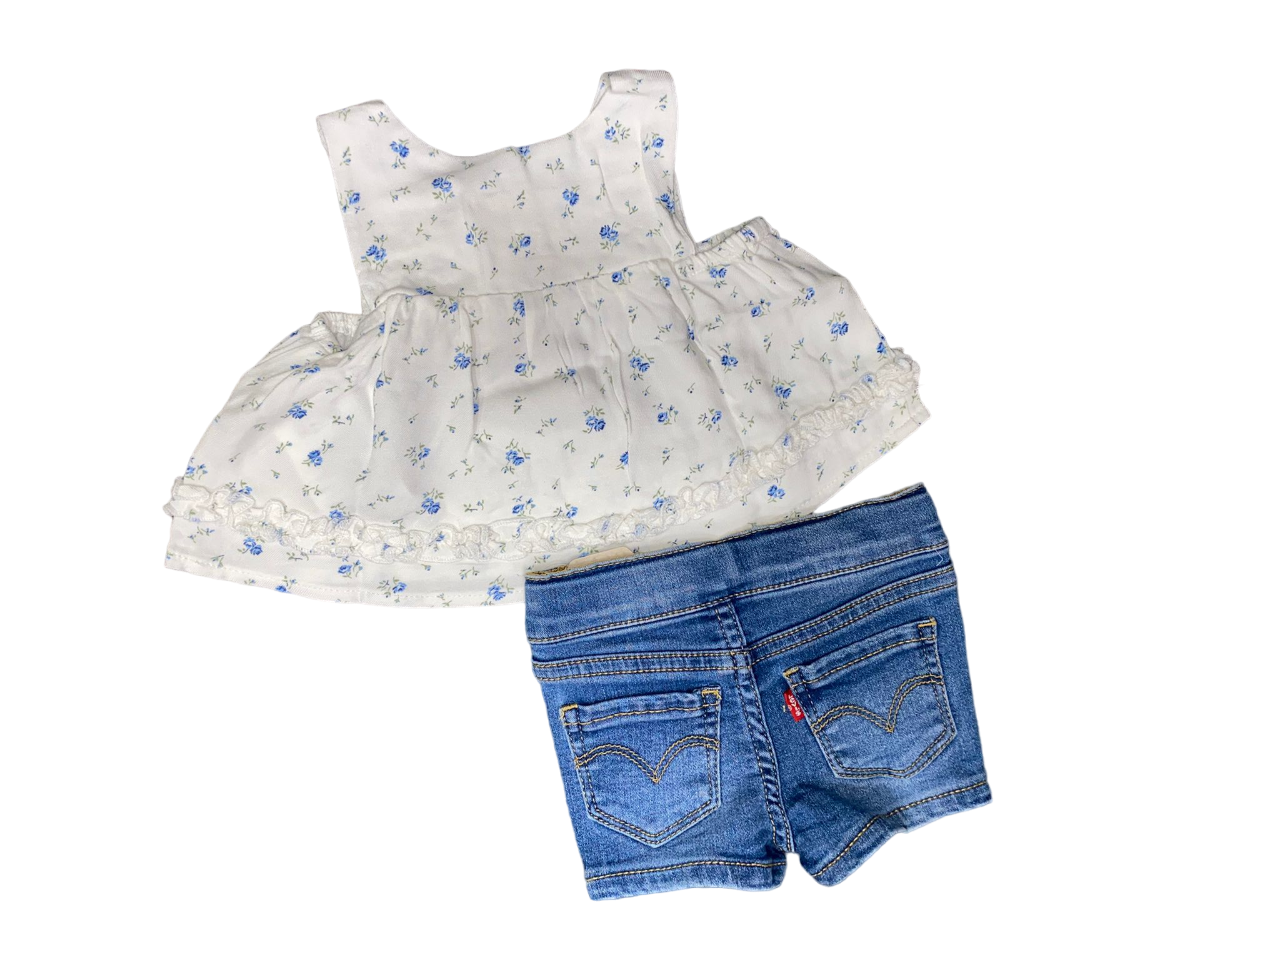 Levi&#39;s children&#39;s outfit with denim shorts and tank top 1EH109 W51 white alyssum